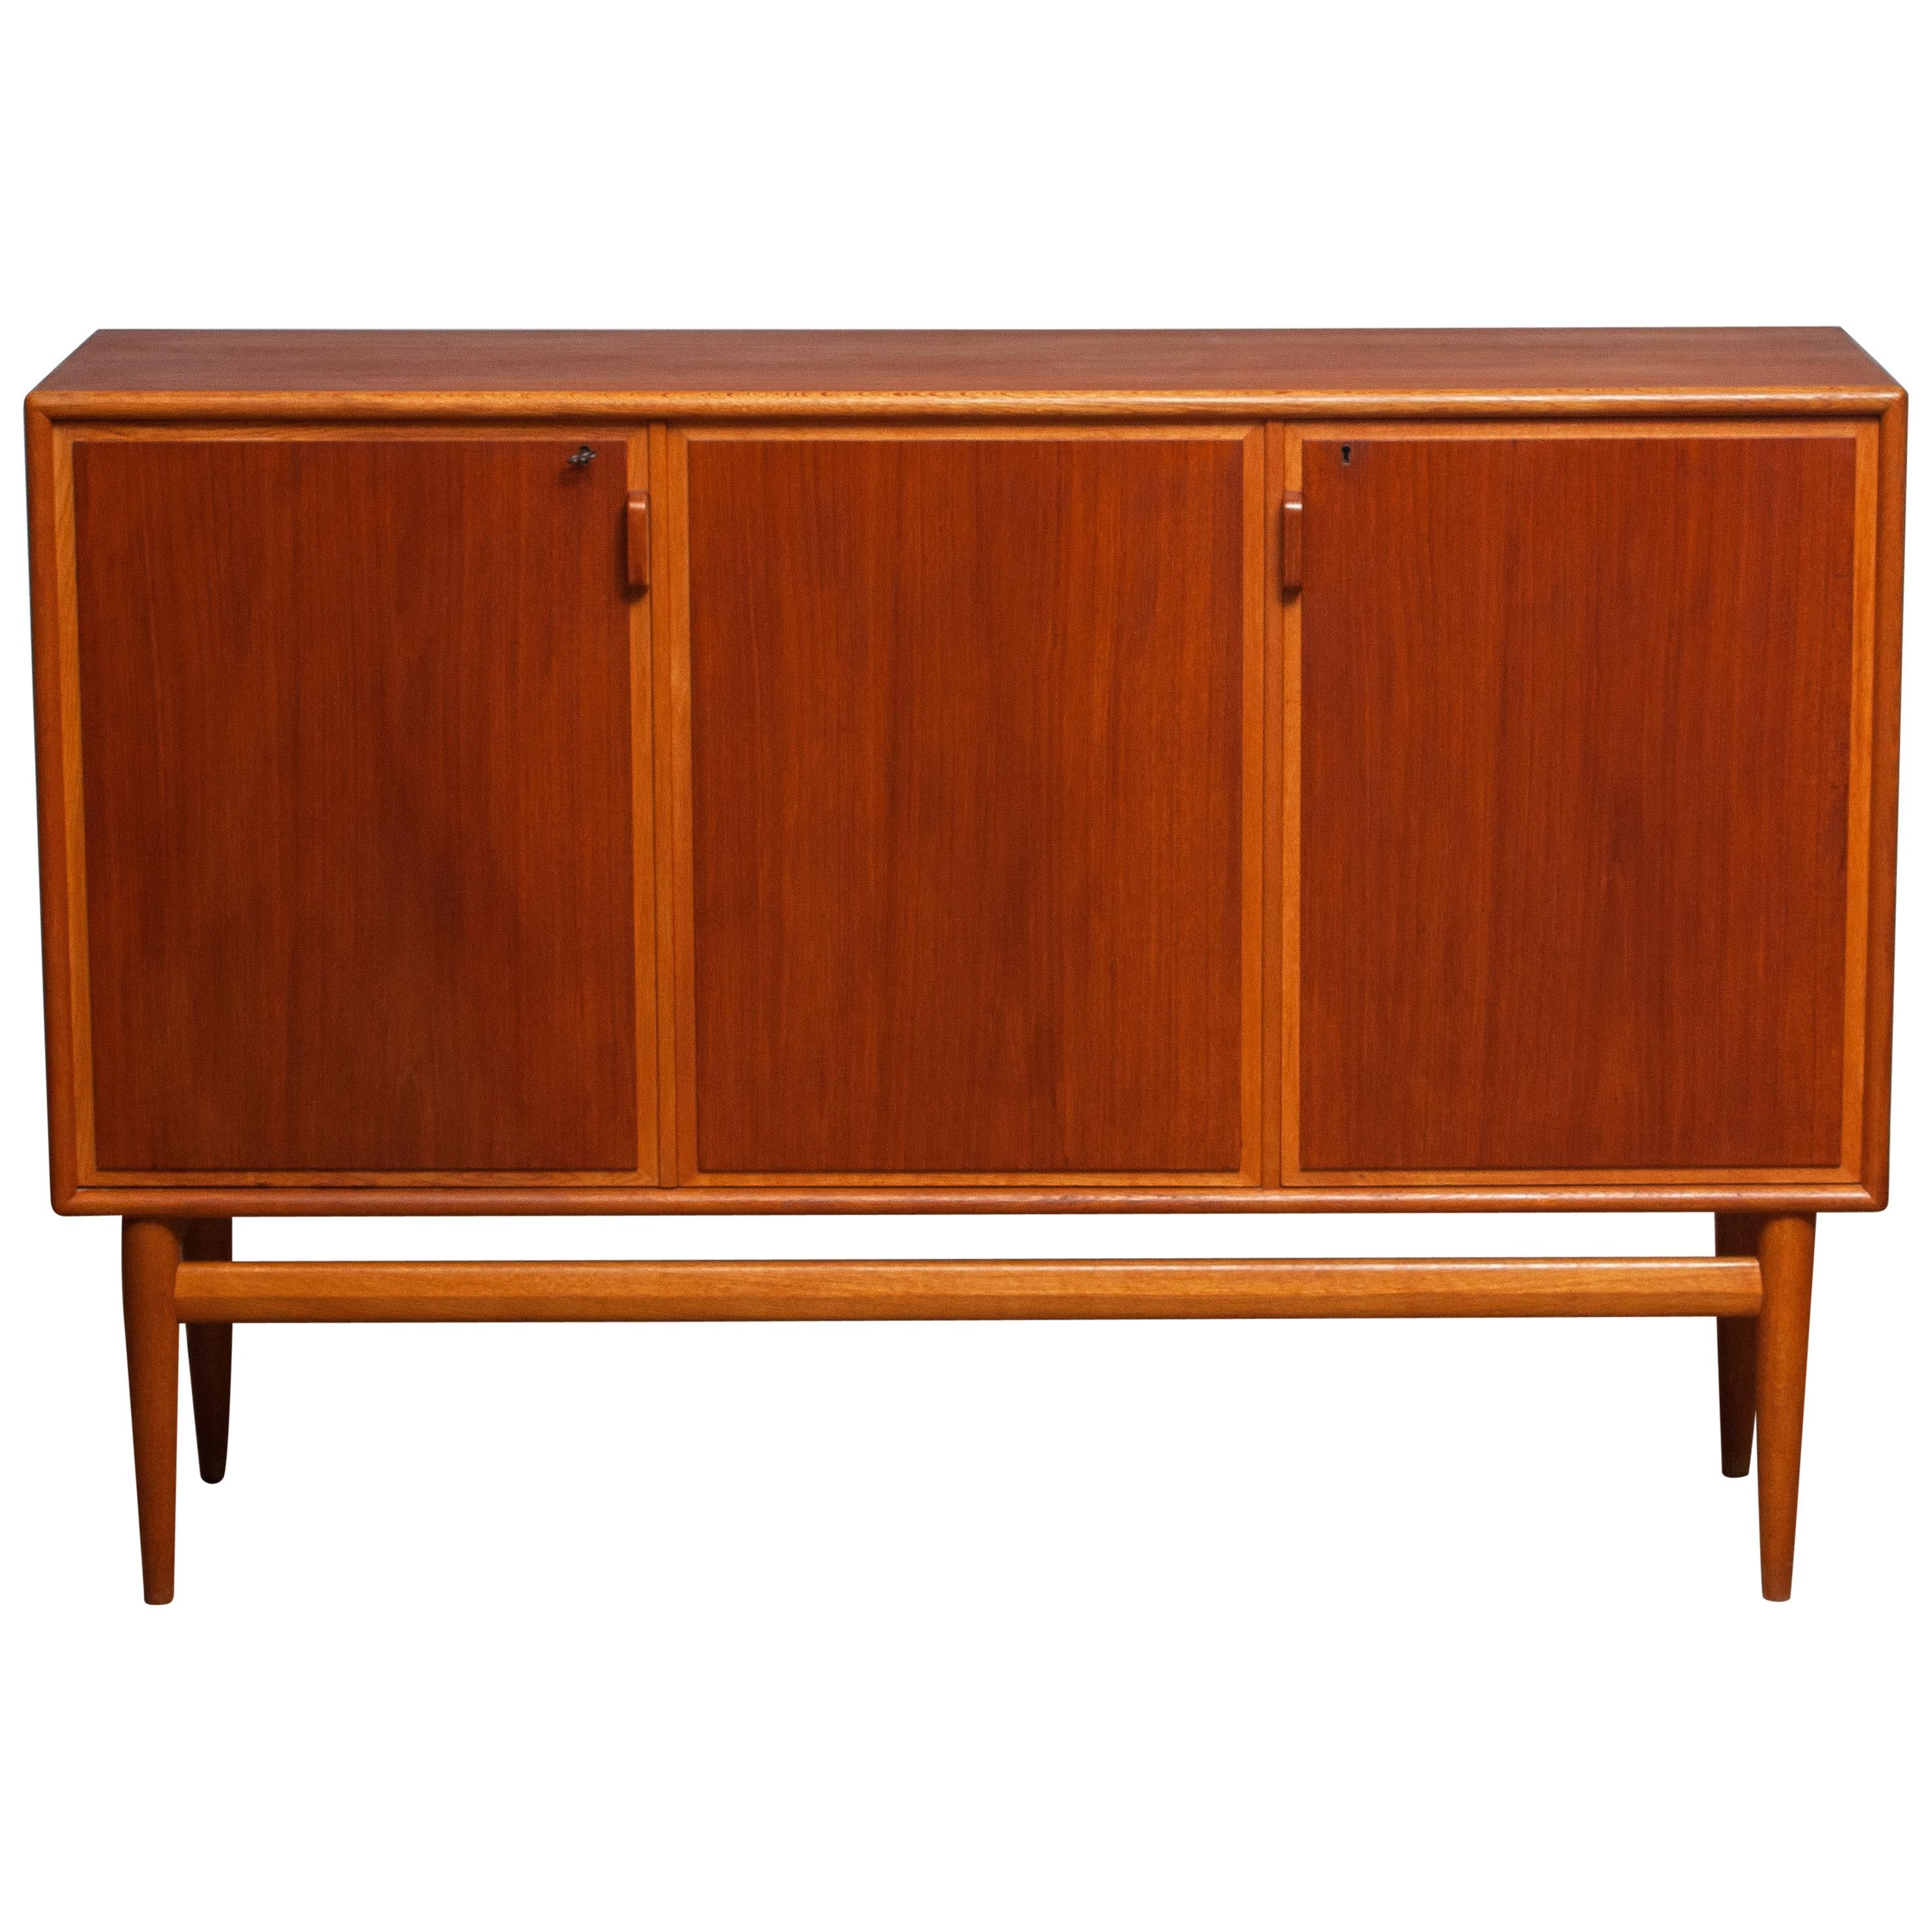 Beautiful and high quality credenzas / buffet cabinet designed by Bertil Fridhagen for Bodafors, Sweden.
The cabinet is made of teak with oak details, the high and stately legs are also in solid oak.
The front consists three swing doors. Once open